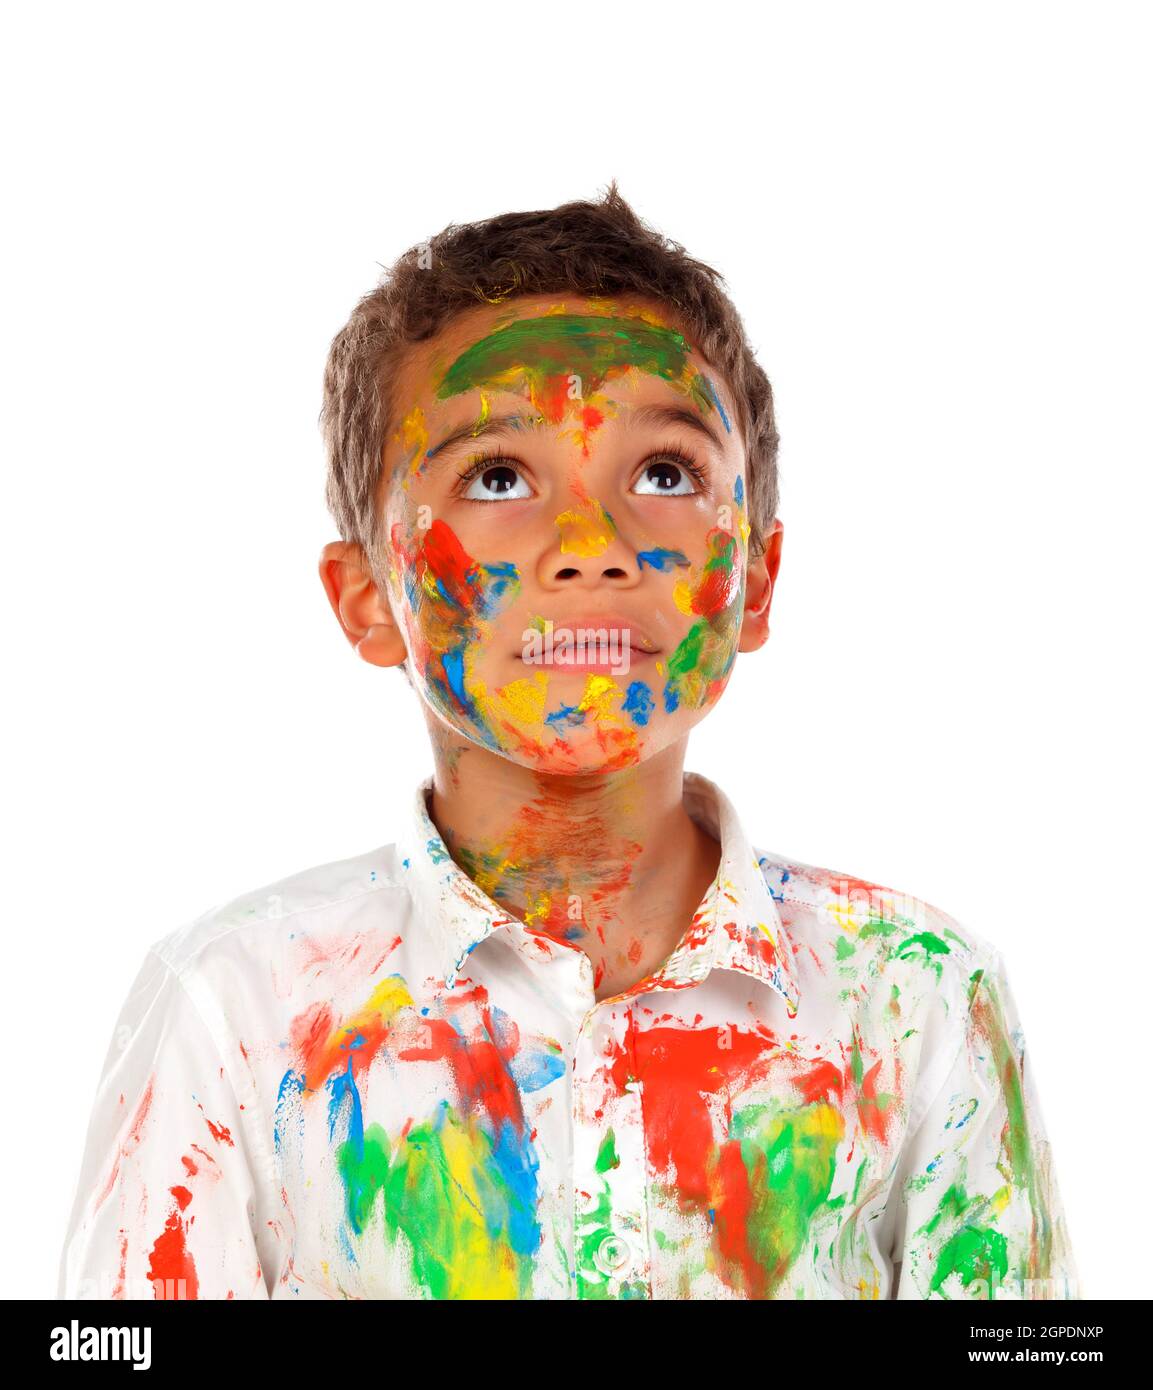 Funny boy with hands and face full of paint isolated on a white background Stock Photo